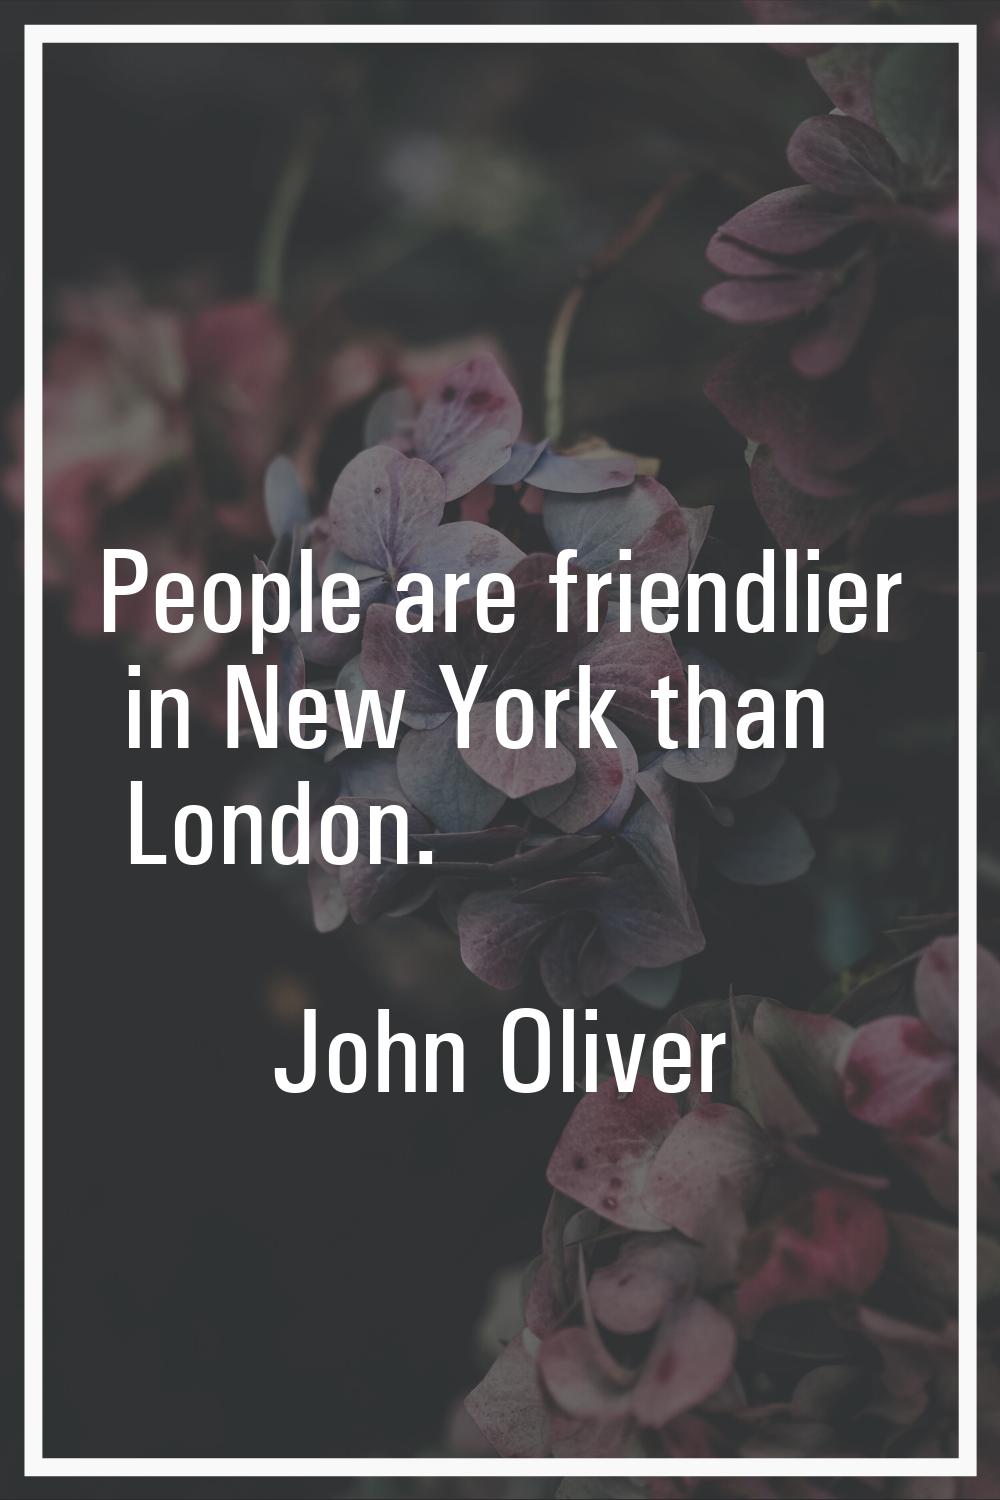 People are friendlier in New York than London.